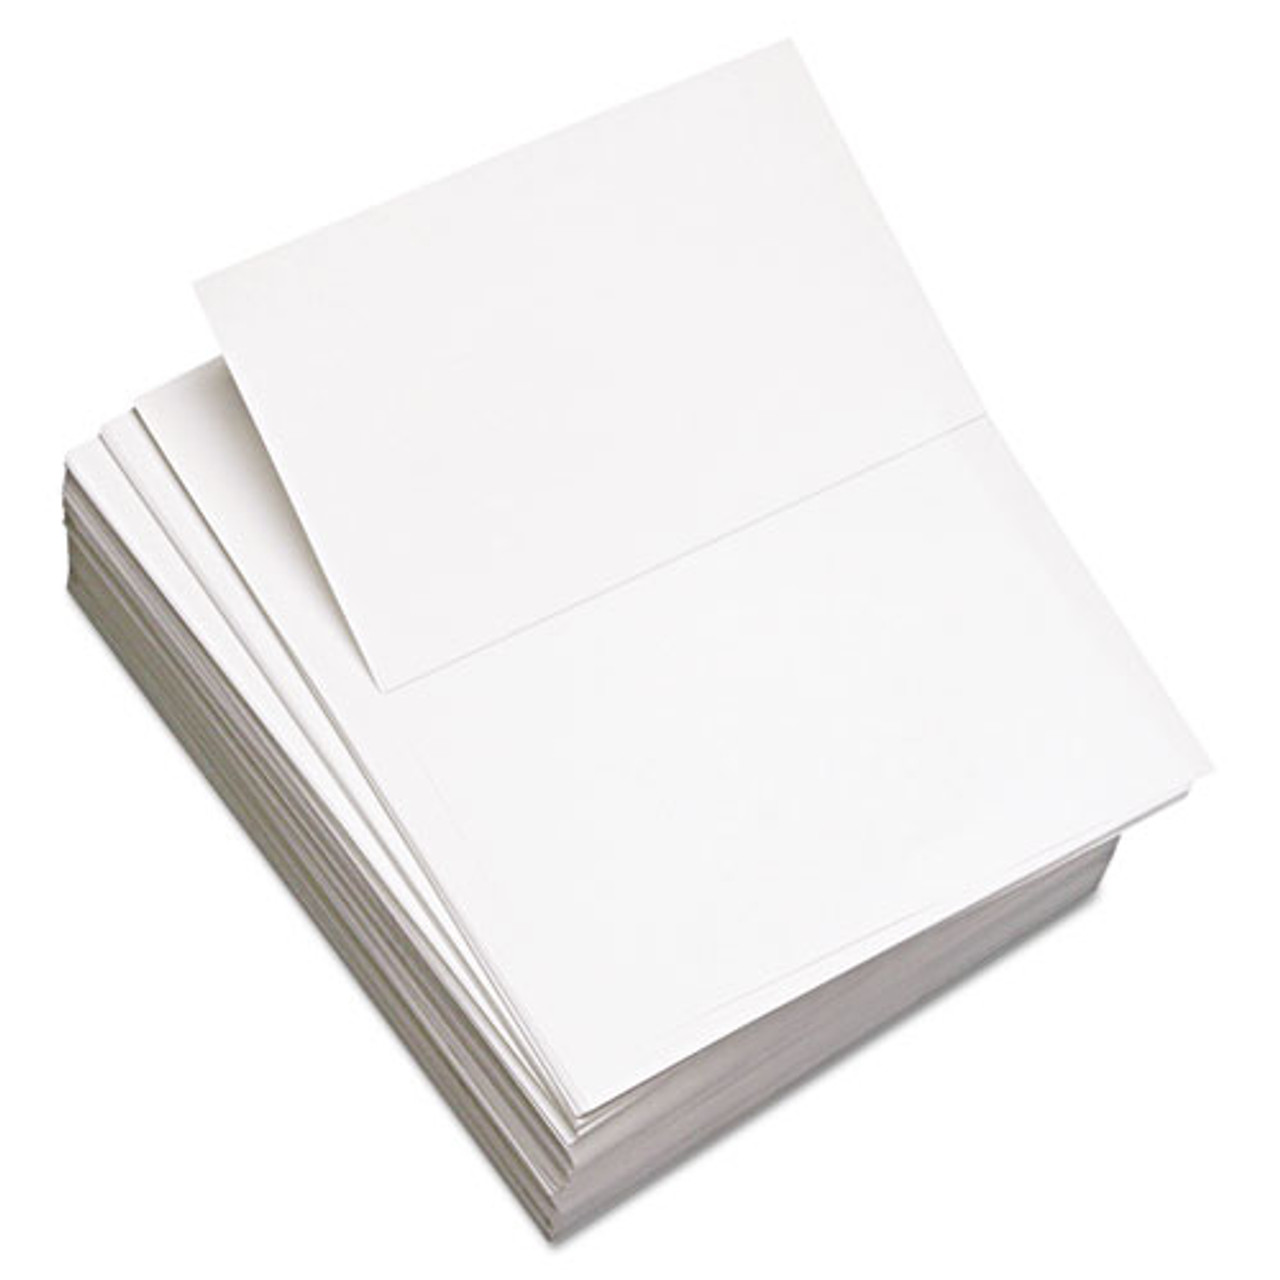 Copy Paper, 92 Bright, 20 lb, 8.5 x 11, White, 500 Sheets/Ream, 10 reams/case  - Western Stationers